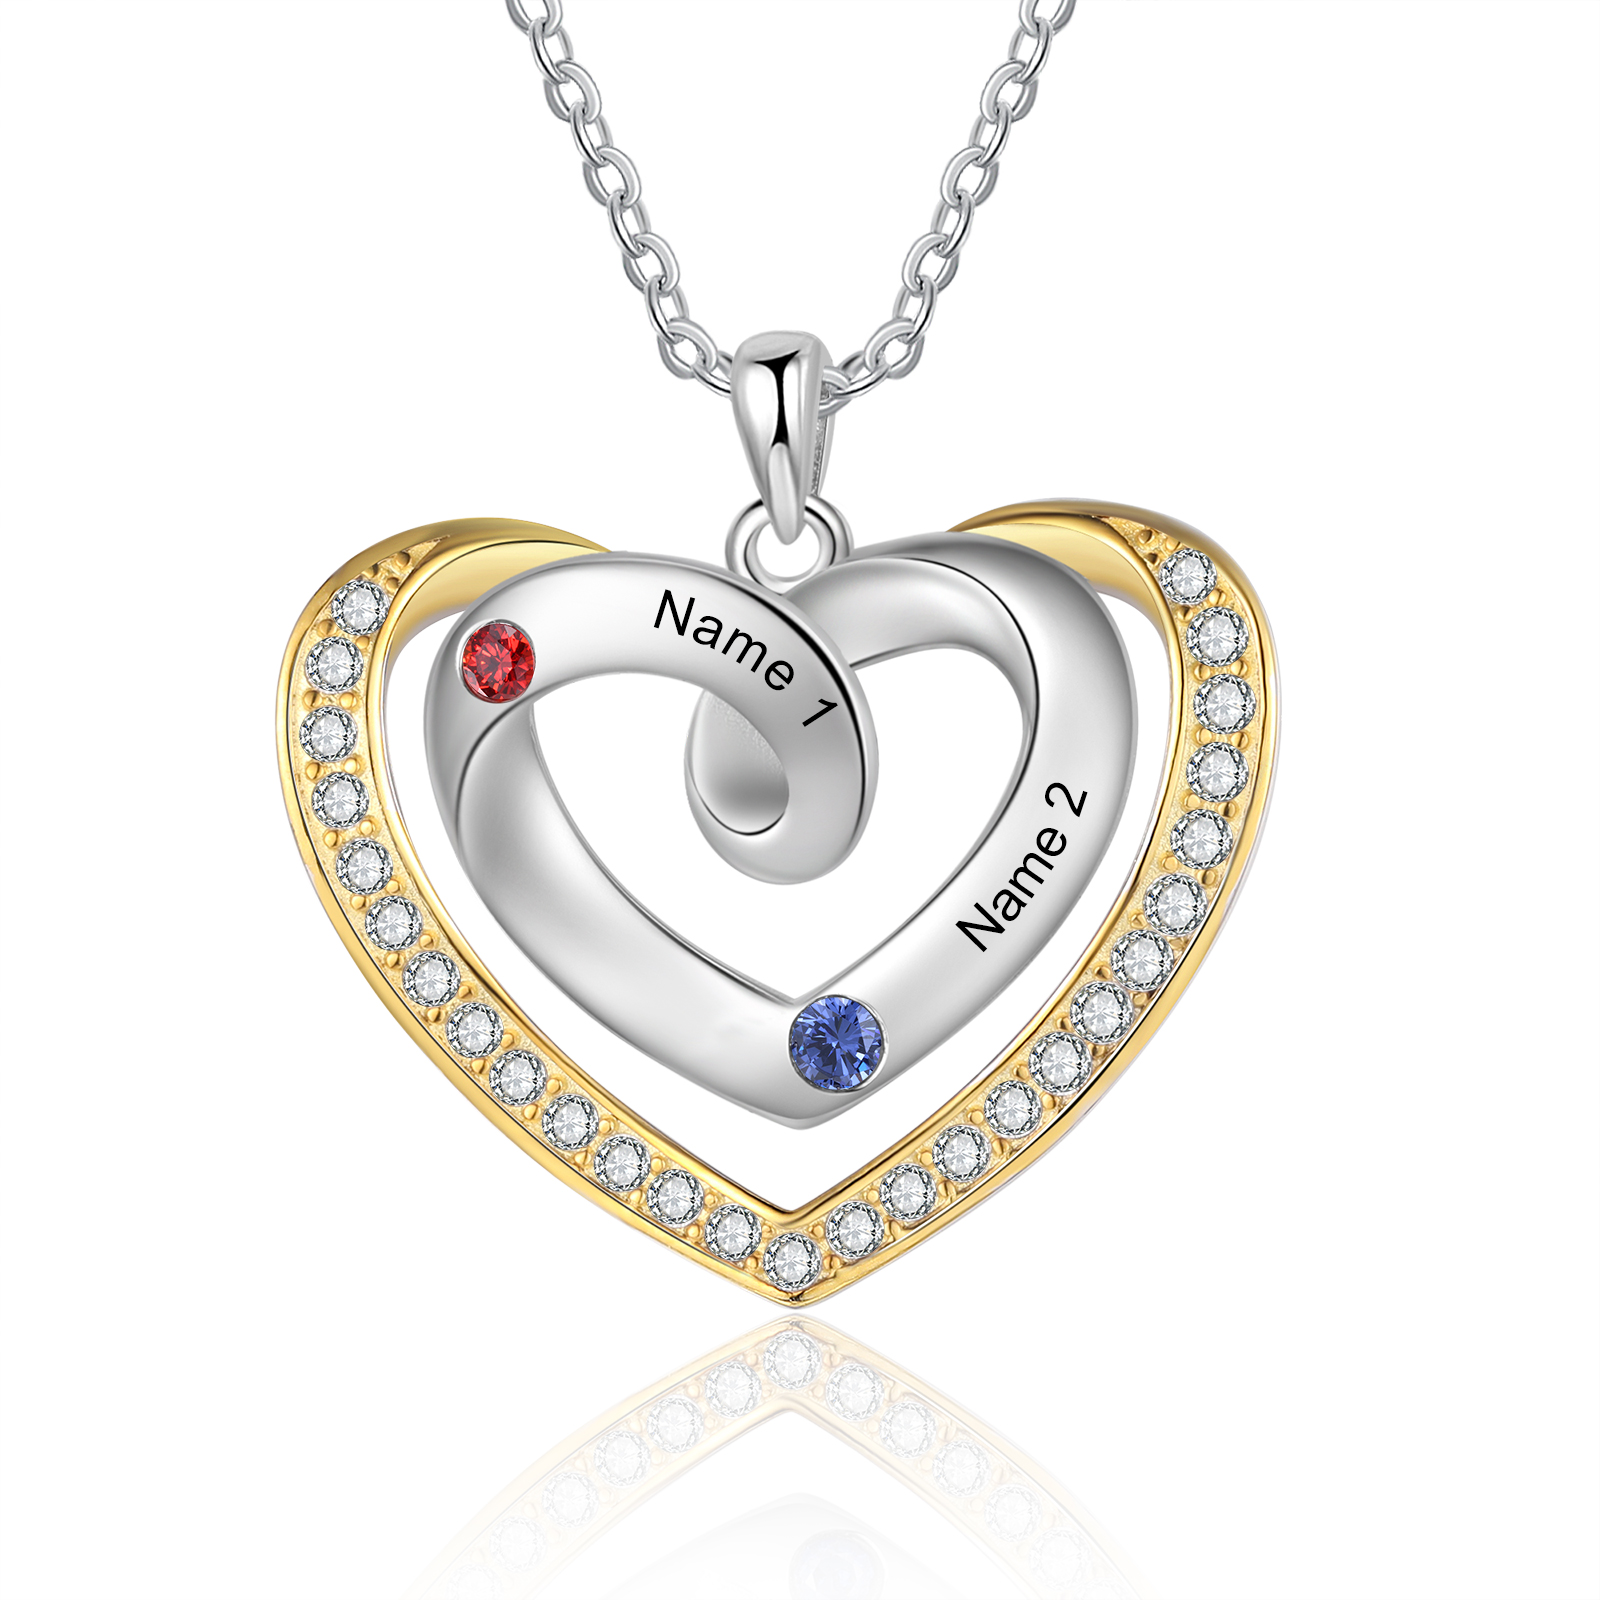 2 Names - Personalized Heart Necklace with Customized Names and Birthstone, A Perfect and Exquisite Gift for Her